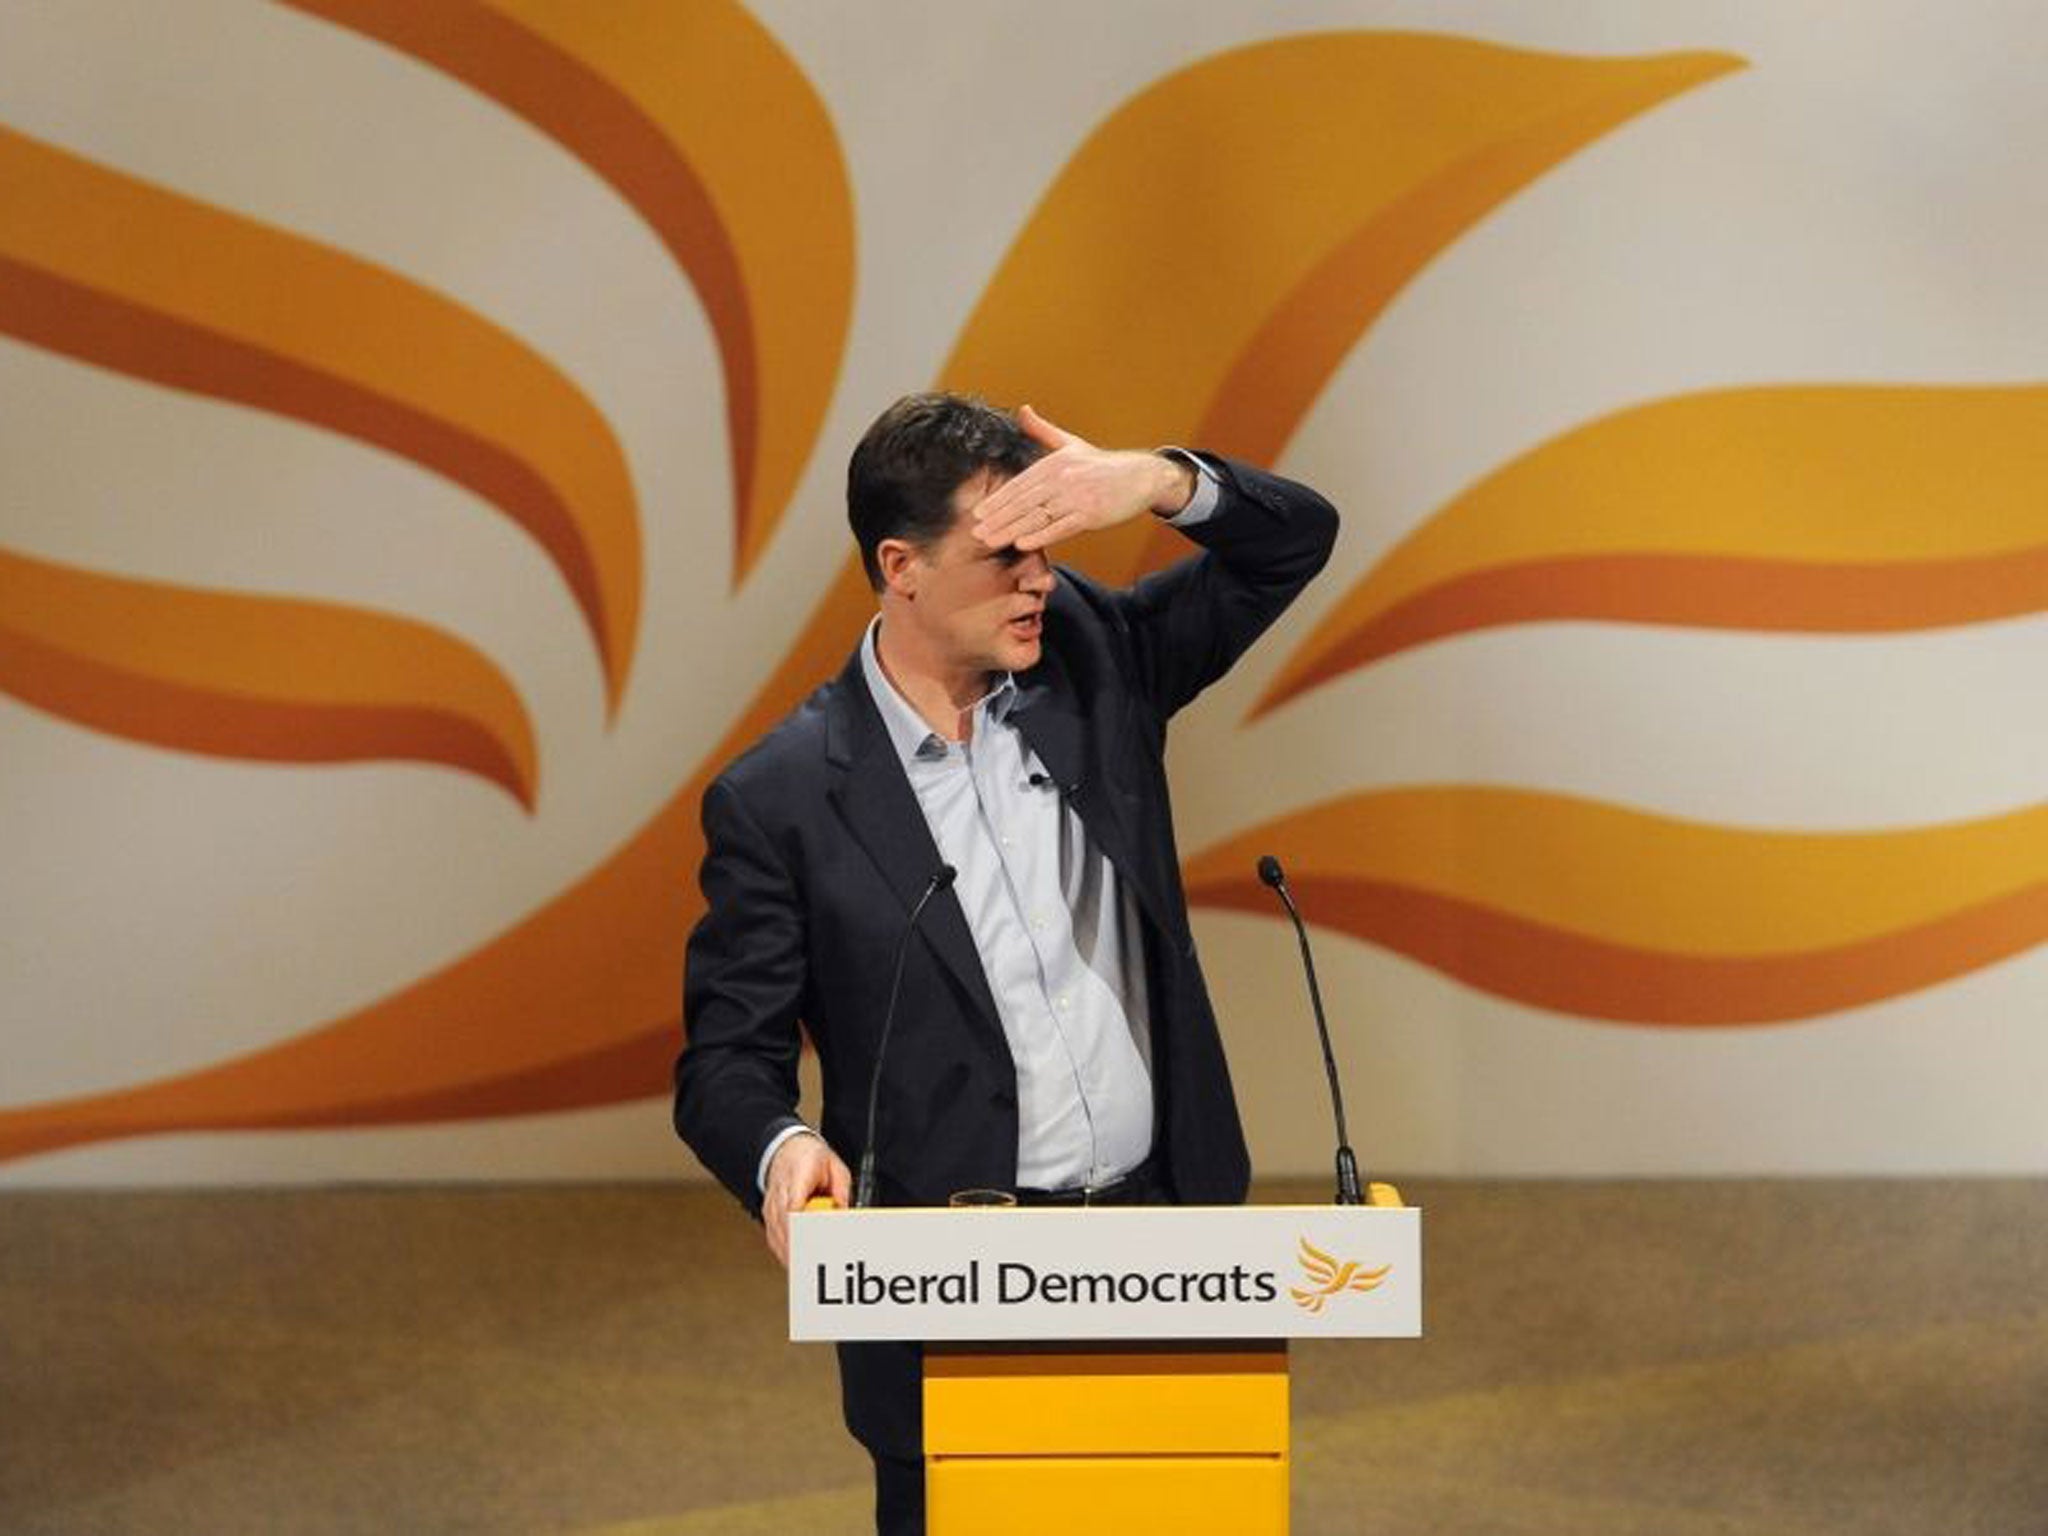 Nick Clegg at the Liberal Democrat Conference